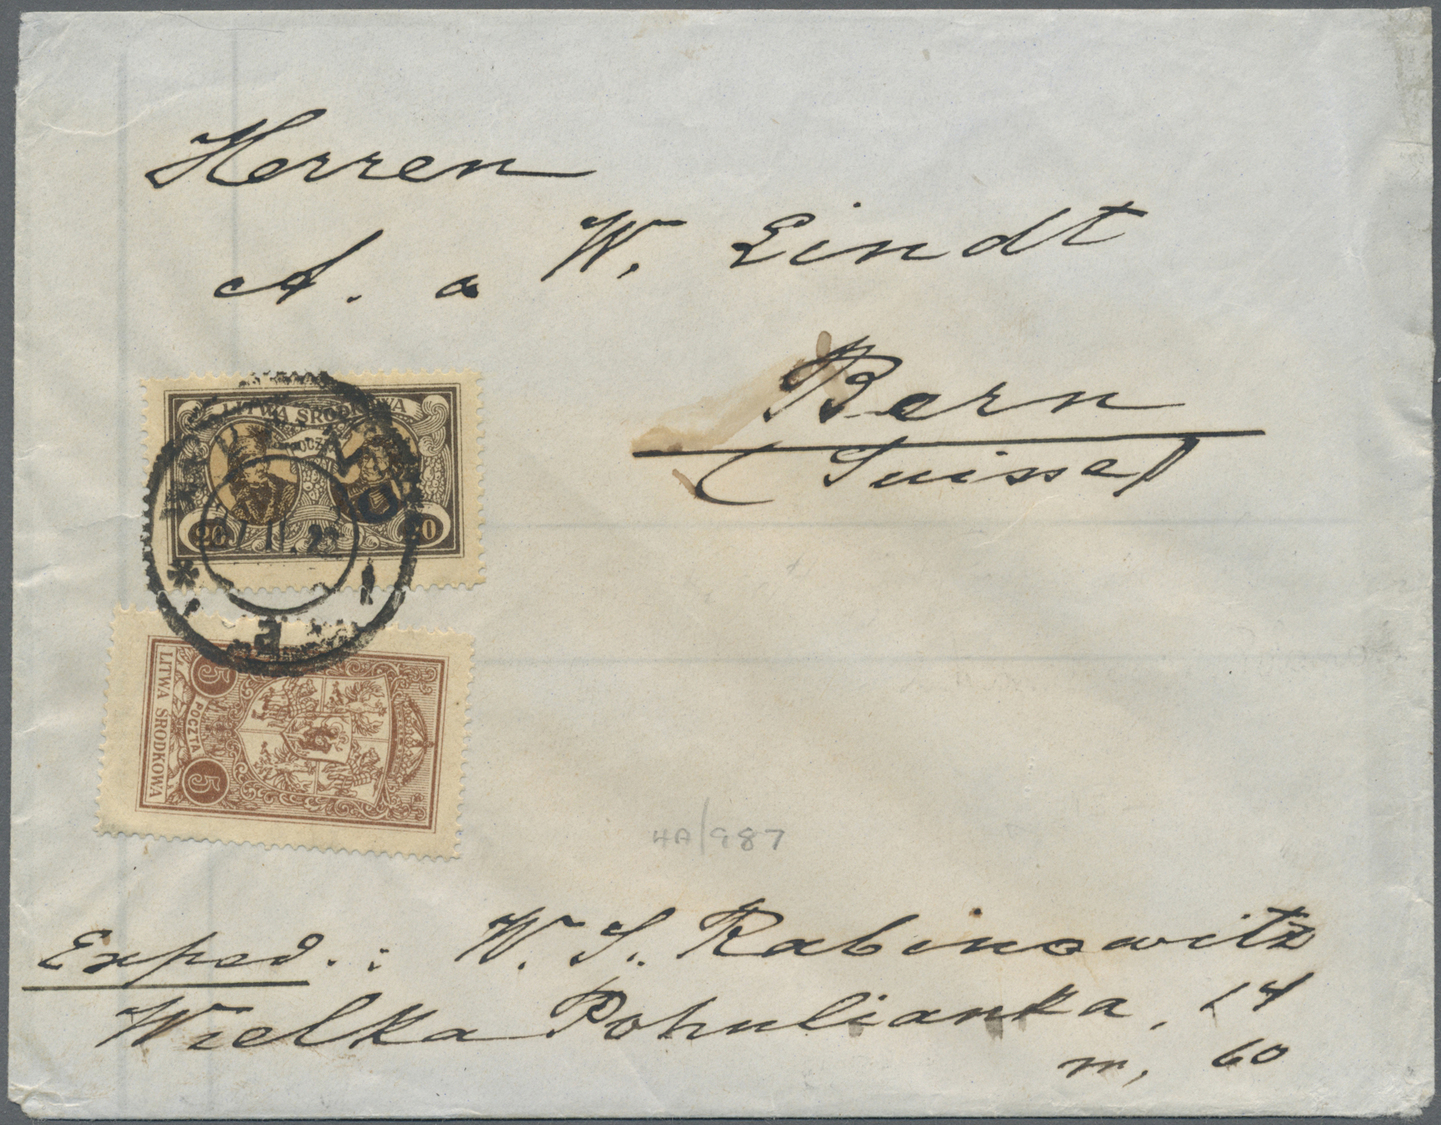 Br Mittellitauen: 1921, 20 M And 5 M Defintitives On Letter From "WILNO 27.II.22" To Bern, Suisse. - Lithuania